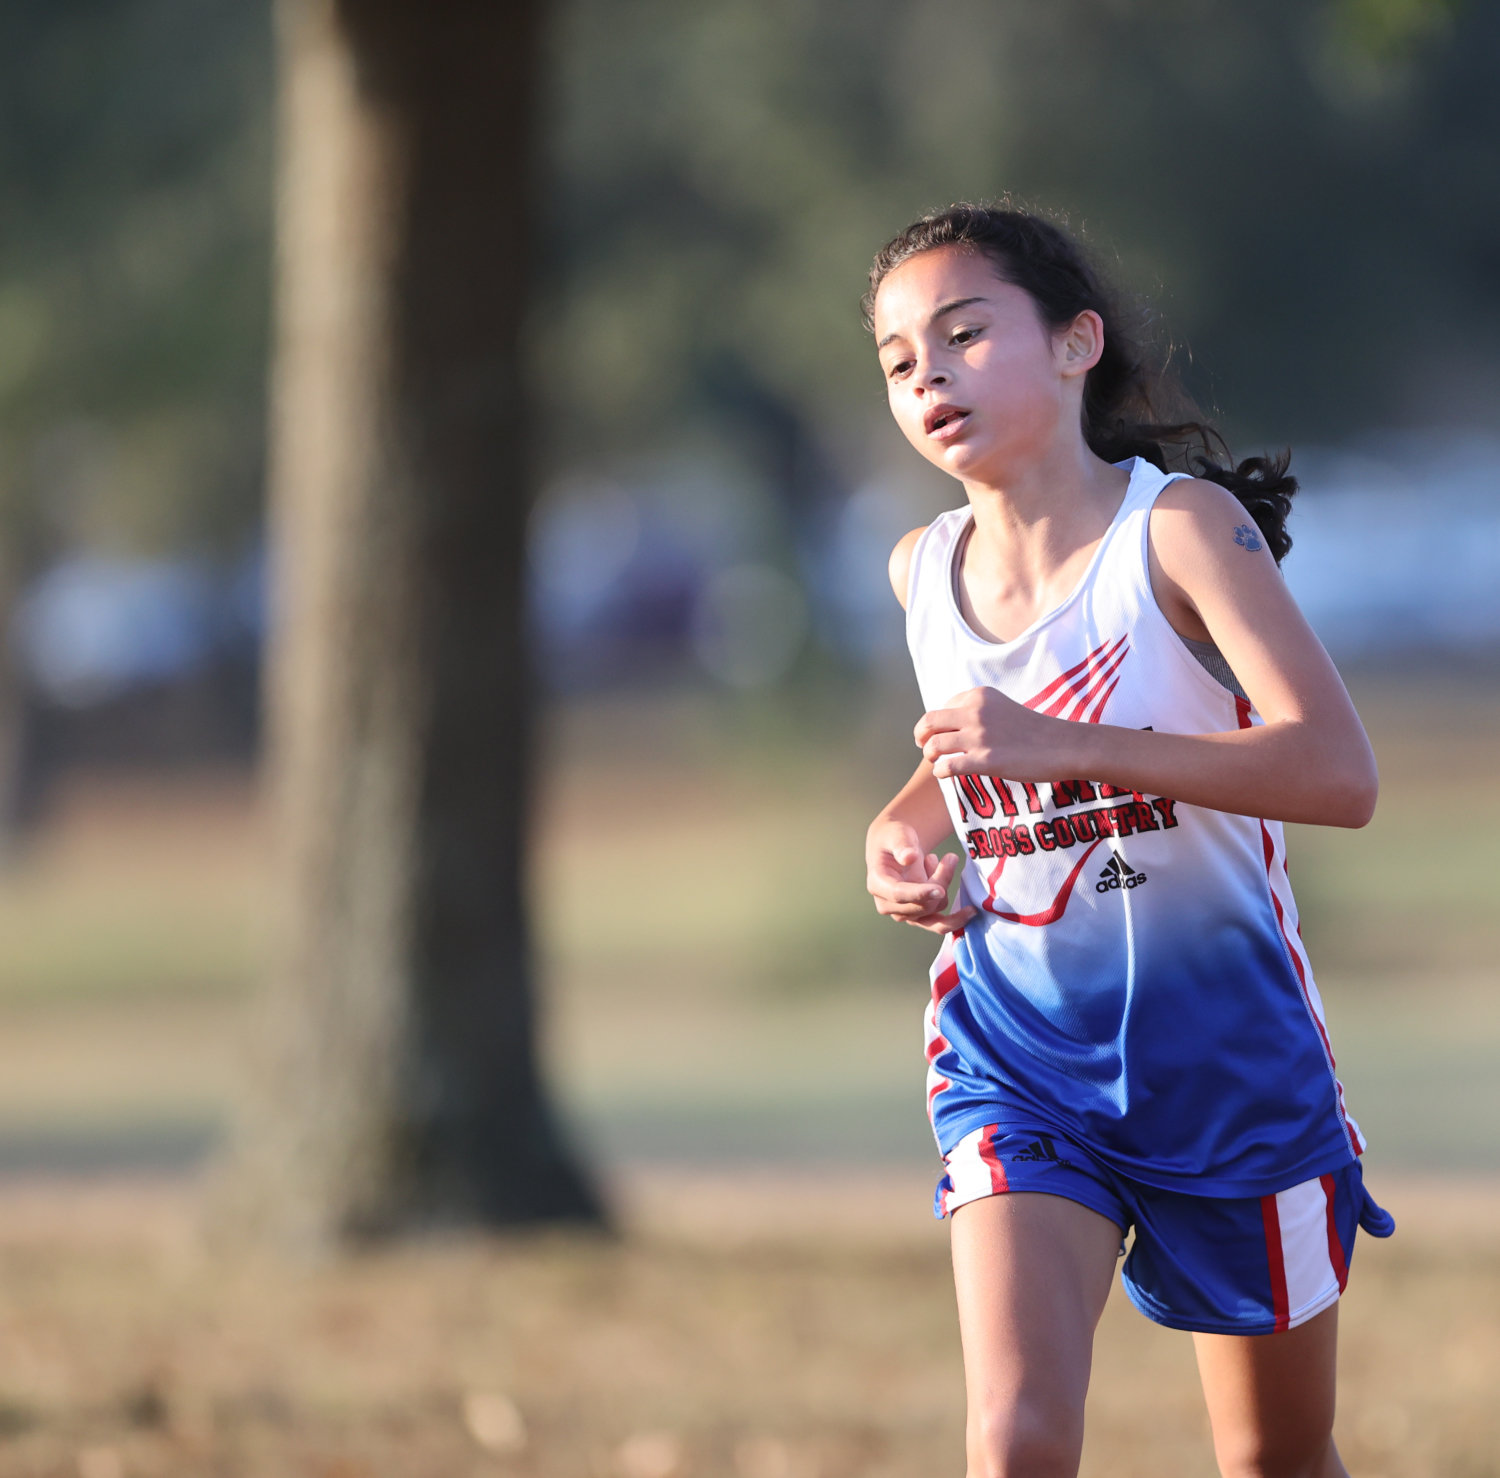 Quitman runner Katie Degorostiza led the district champion Lady Bulldogs with a winning time of 13:02 Saturday morning.